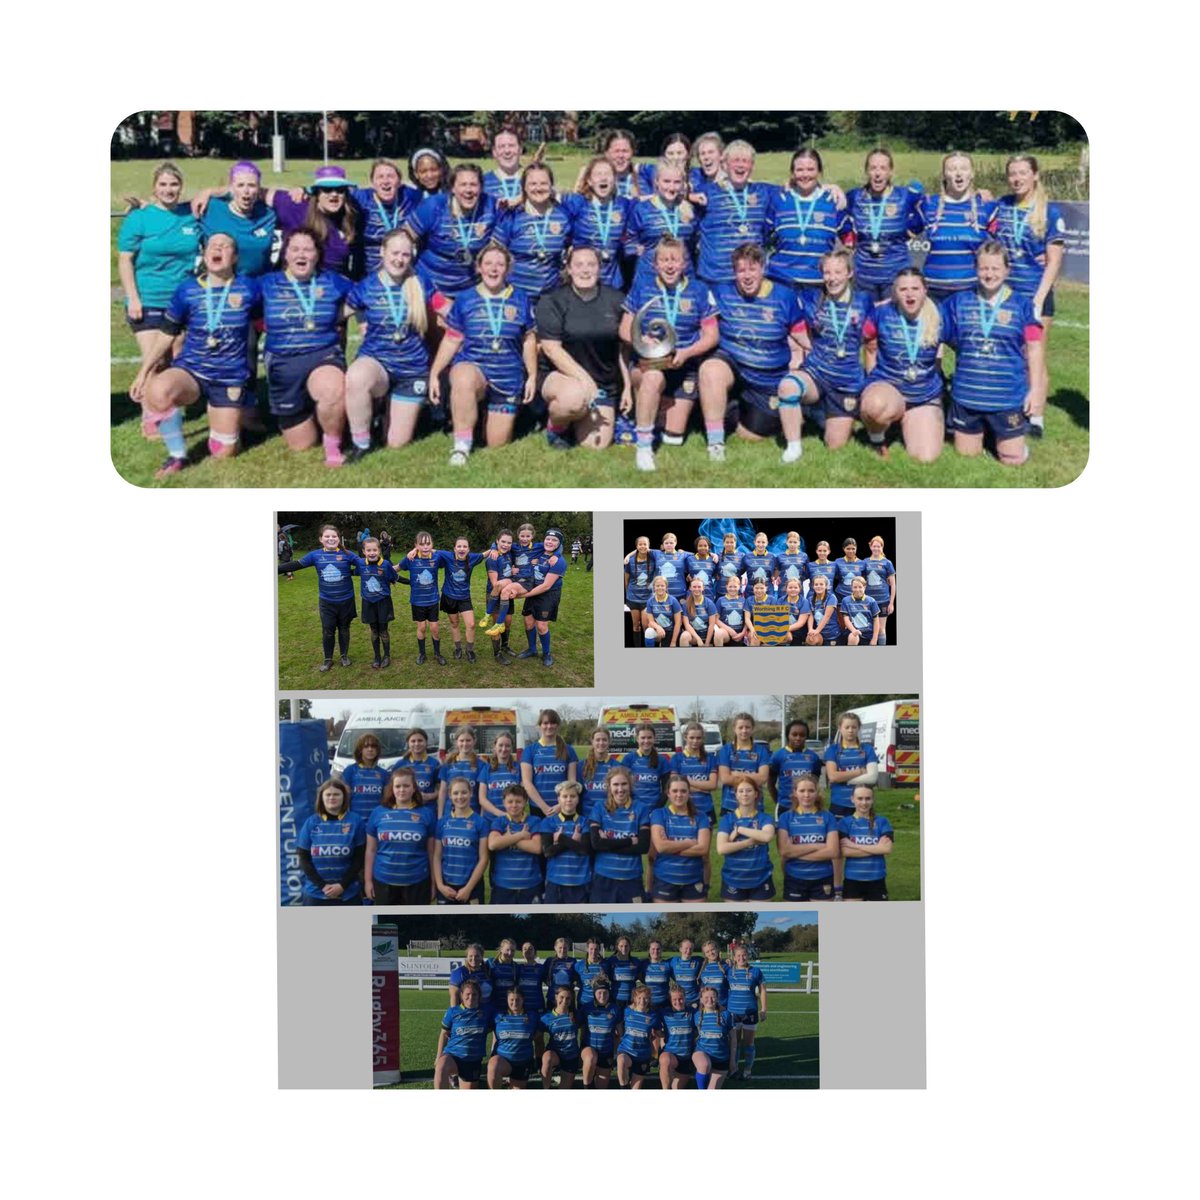 Happy International Women's day from all @WorthingRFC. This year's theme: Invest in women: Accelerate progress! #InvestInWomen #AccelerateProgress #girlsrugby #thisgirlcan #Rugby #Rugbyplayer #team #WomenInSport #womensrugby